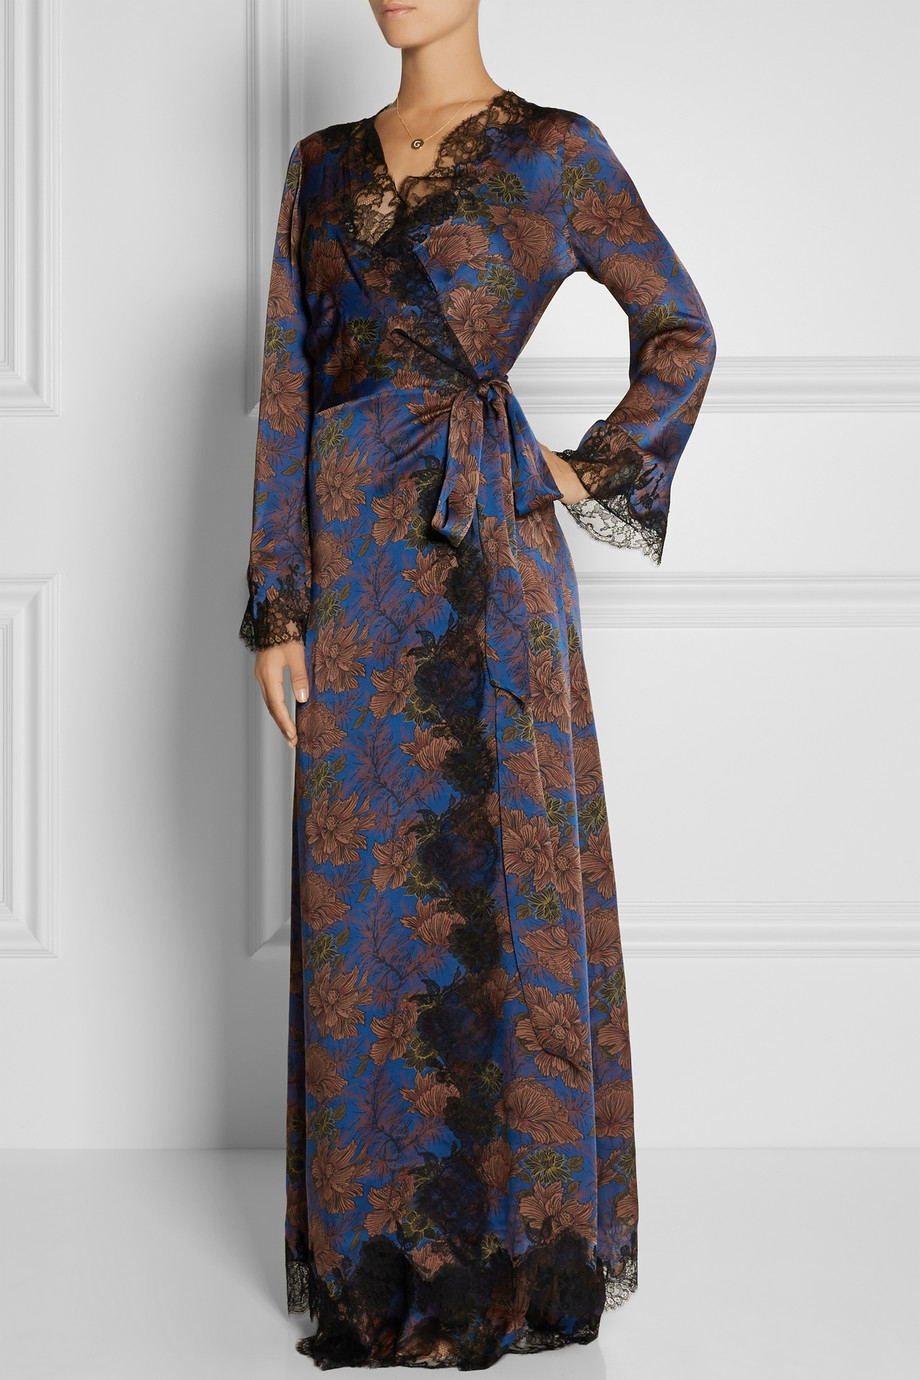 Lyst - Carine Gilson Ukyo Lace-Trimmed Printed Silk-Satin Robe in Blue